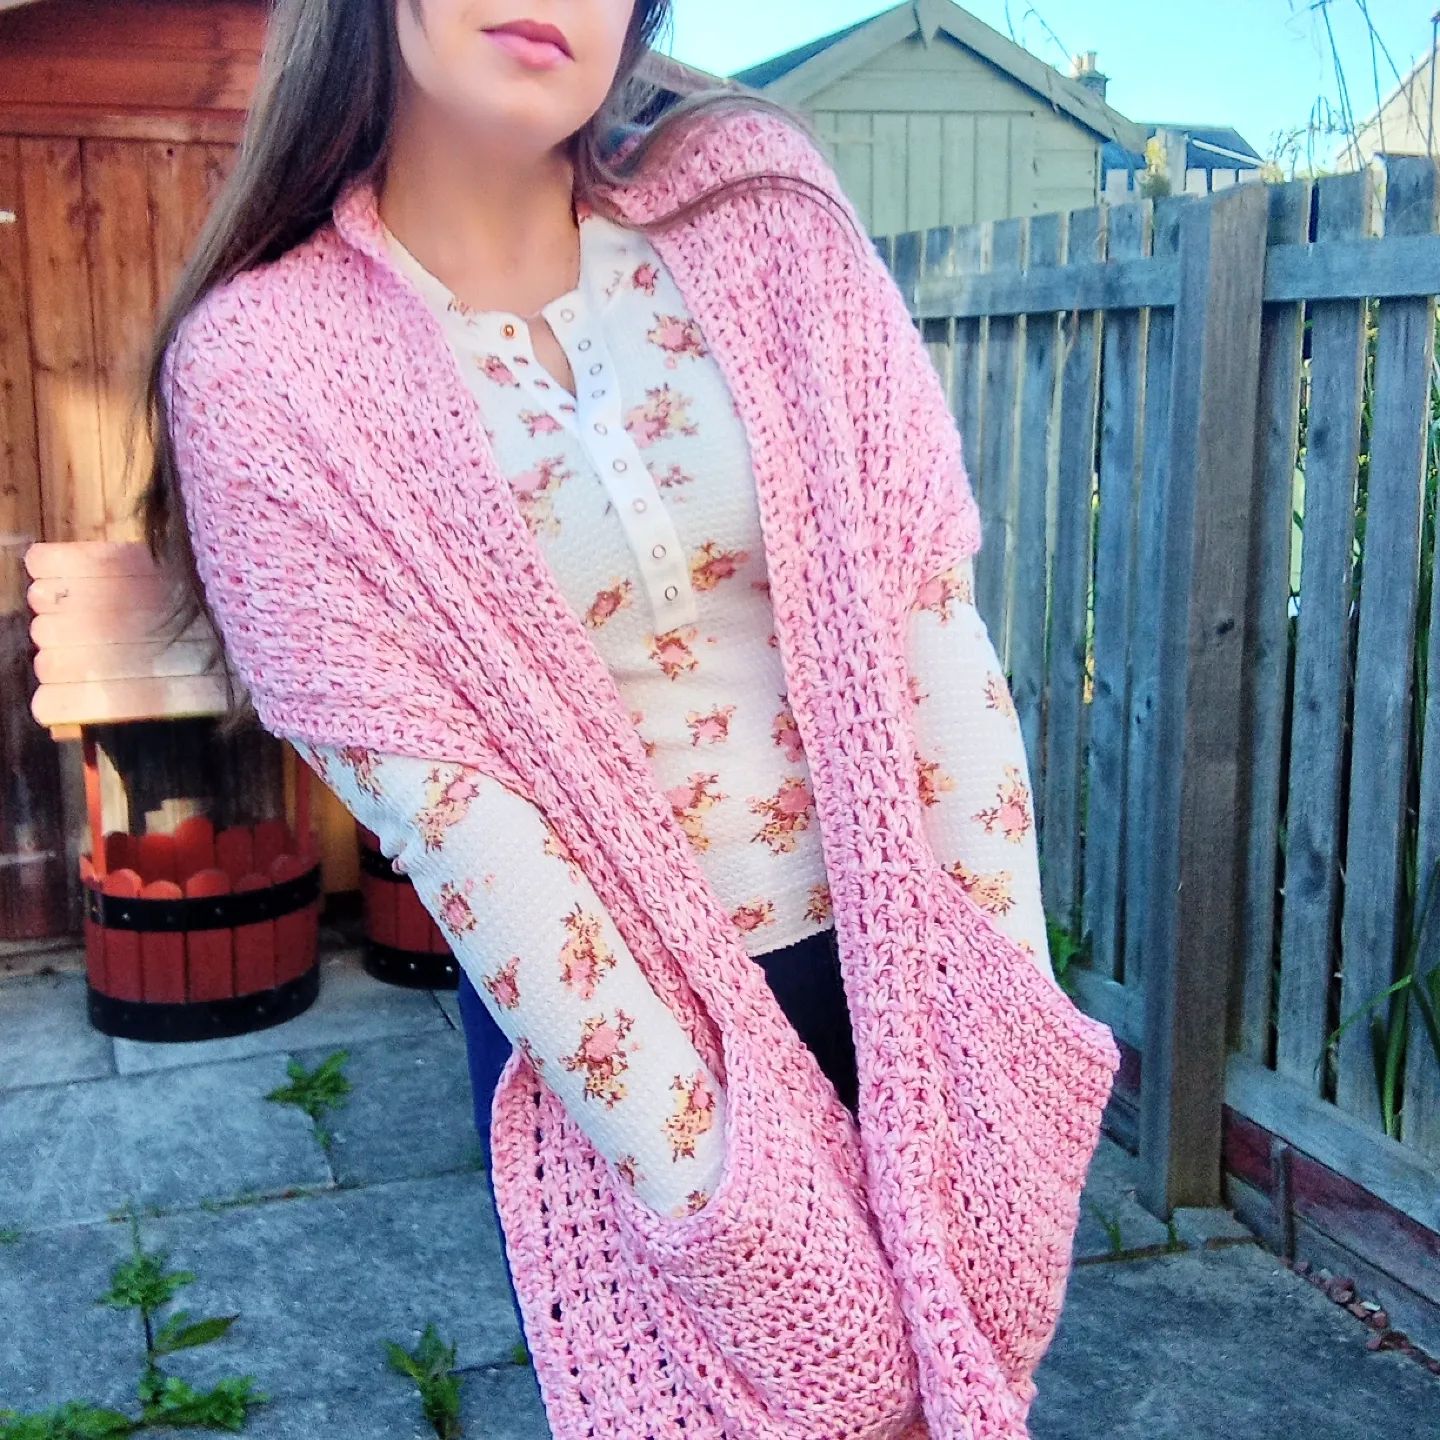 My new crochet tutorial is now live for this pink pocket shawl, I am in love with it 💞
This tutorial has been highly requested and I hope you enjoy it 🌸🌸🌸
Full written pattern is available for free on my blog, and full video tutorial is up on YouTube (links are in my bio) 💞💞💞

#crochet #crochetinspiration #hookedonhandmade #crochetgram #crochetersofinstagram #crochetpattern #crochetaddict #crochetersofinstagram #instacrochet #crochetaddict #crochetpattern #crocheter #igcrochet #crochetlover #crochetyoutuber #crochetpassion #instacrochet #crochettutorial #diy #minutescraft #hookedoncrochet #crochetyoutuber 
#sellinaveroniquecrochet #selinaveronique